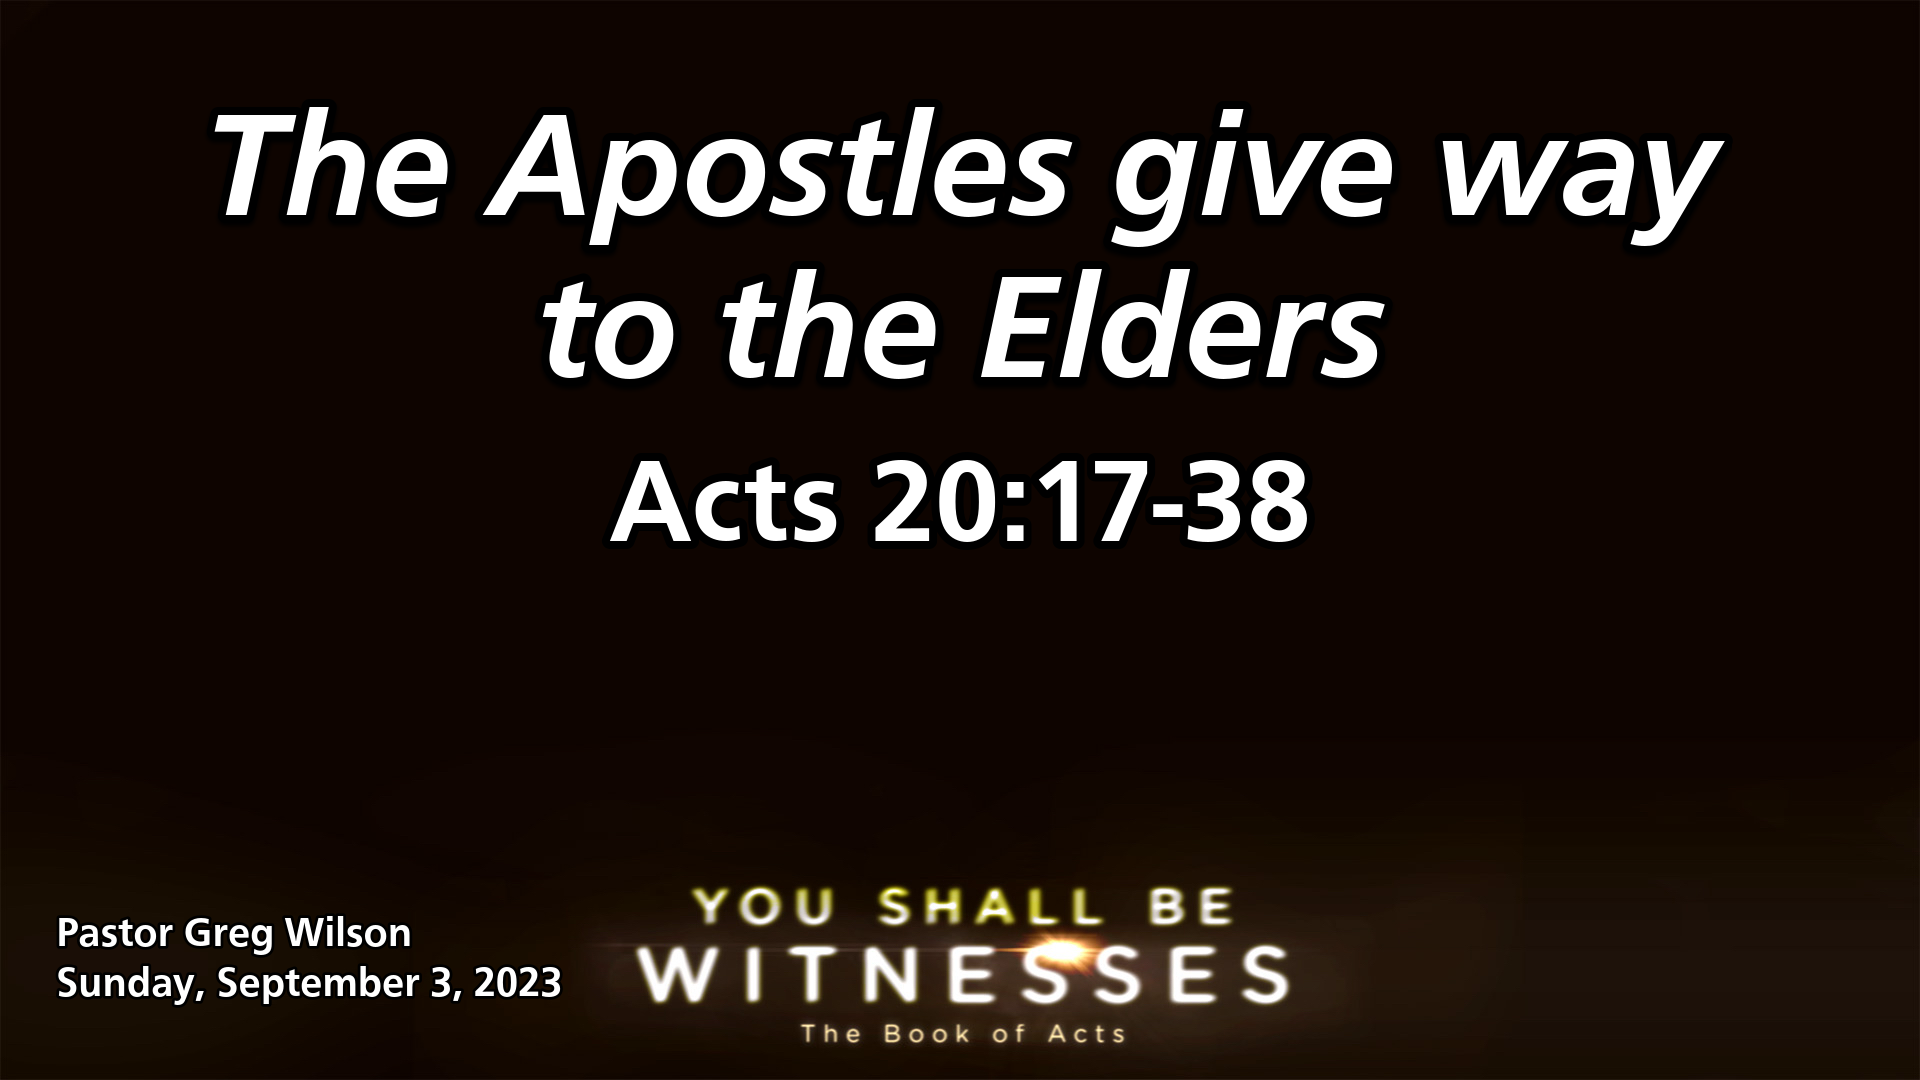 "The Apostles give way to the Elders"